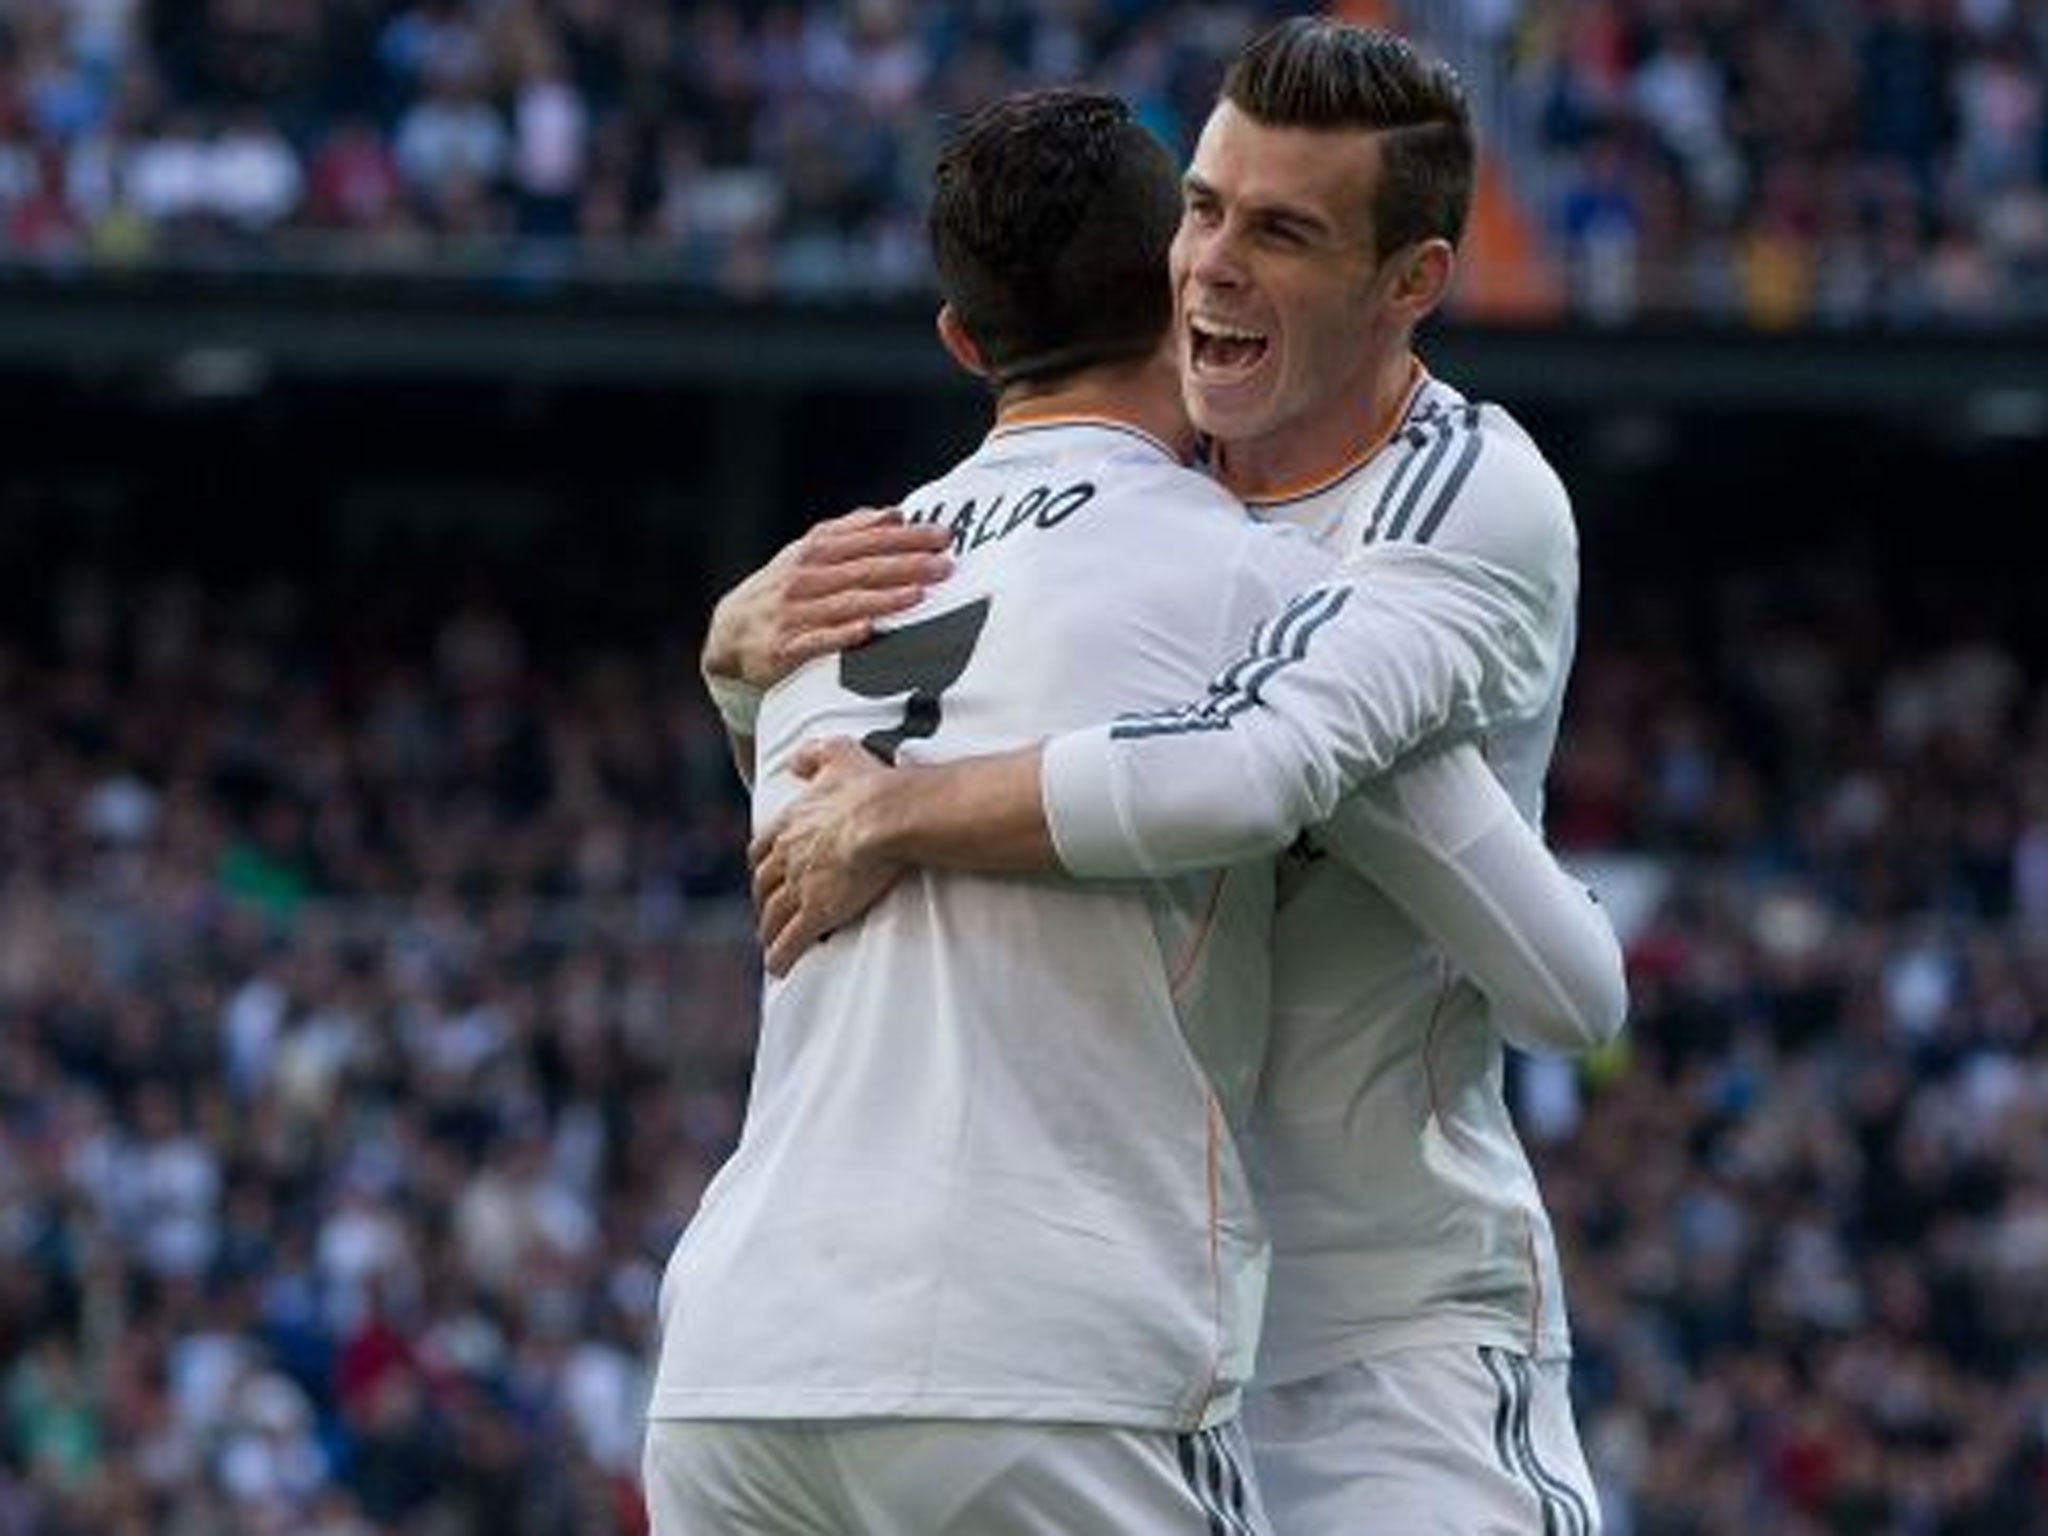 Since the season’s first Clasico which ended in Barça victory, Gareth Bale has forged a wonderful partnership with Cristiano Ronaldo